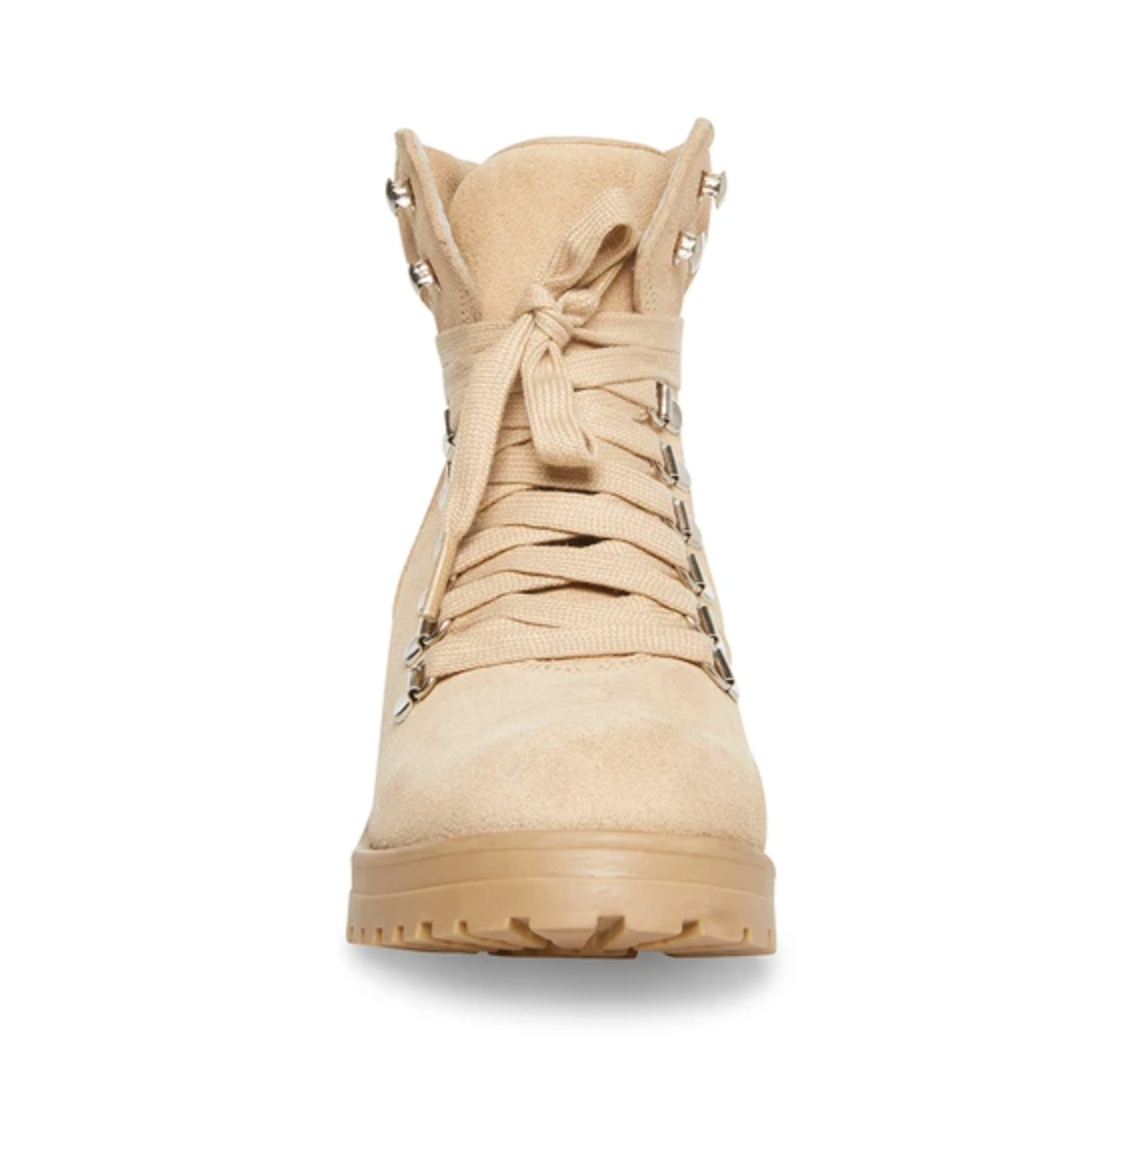 Steve Madden- Hint Sand Suede Lug Soled Leather Bootie